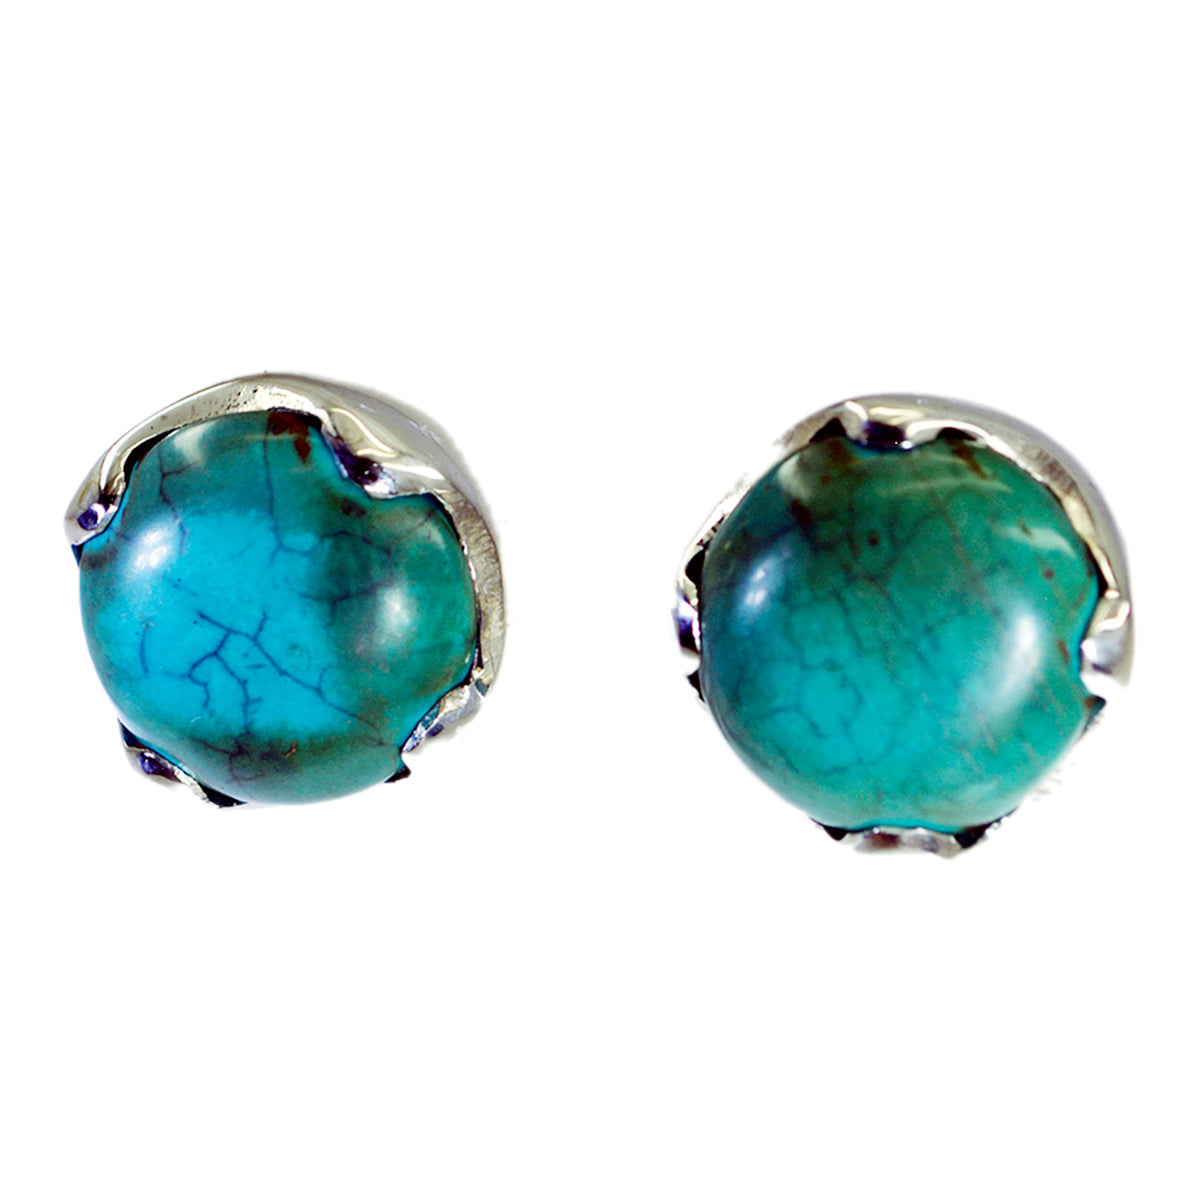 Riyo Real Gemstones round Cabochon Multi Turquoise Silver Earring gift for b' day